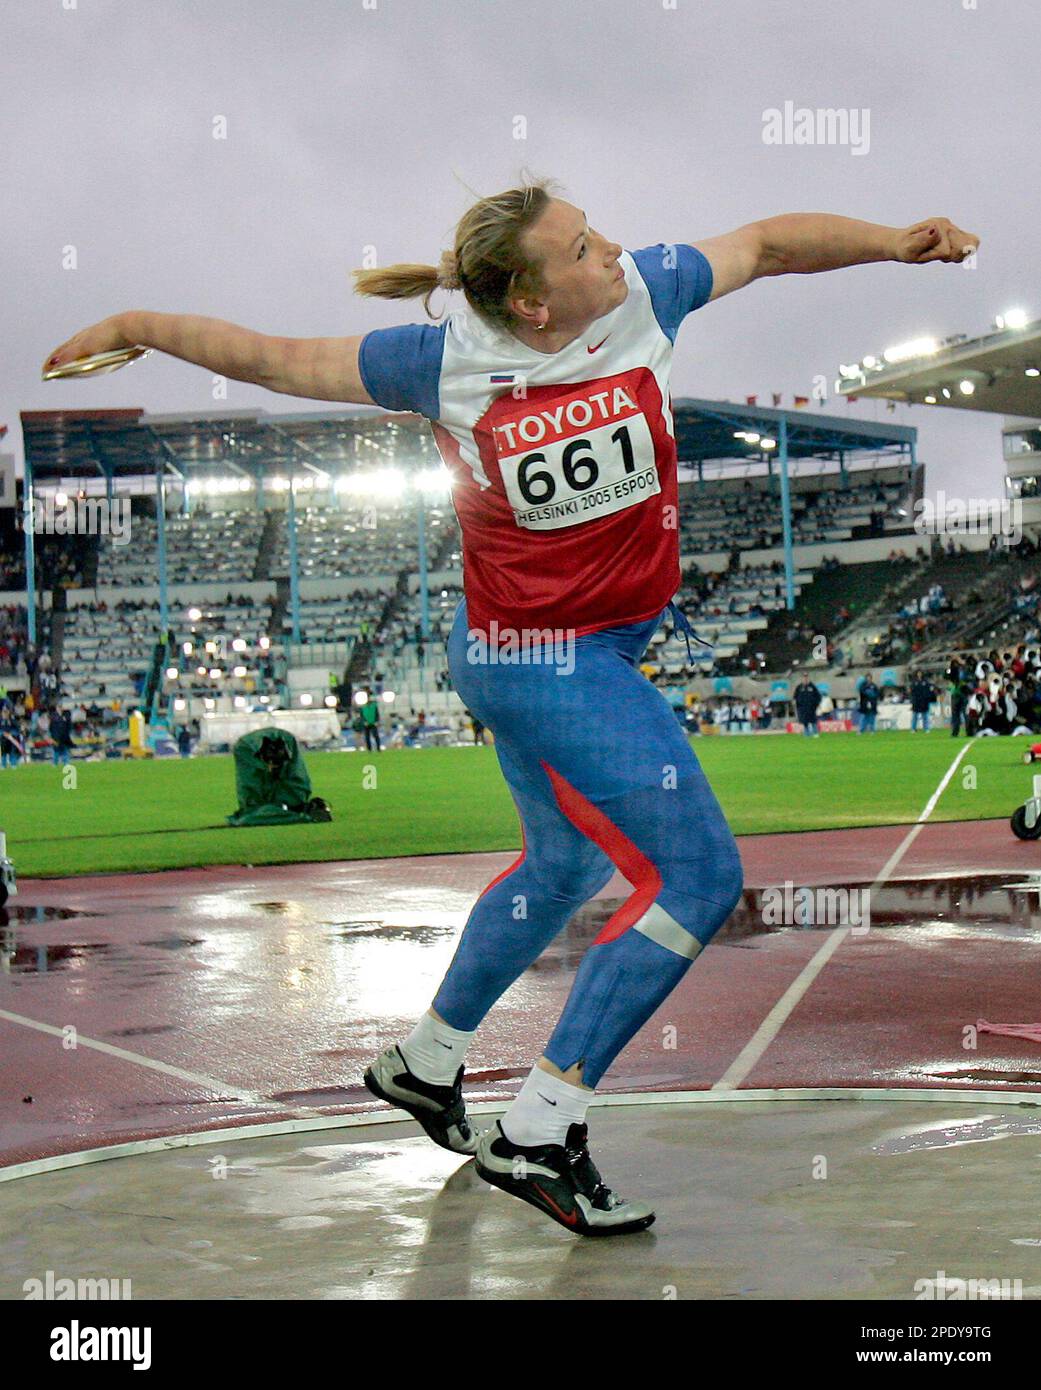 Natalya Sadova of Ukraine competes in the final of the Women's discus at the World Athletics Championships in Helsinki, Finland, Thursday Aug. 11, 2005. (AP Photo/Thomas Kienzle) Stock Photo